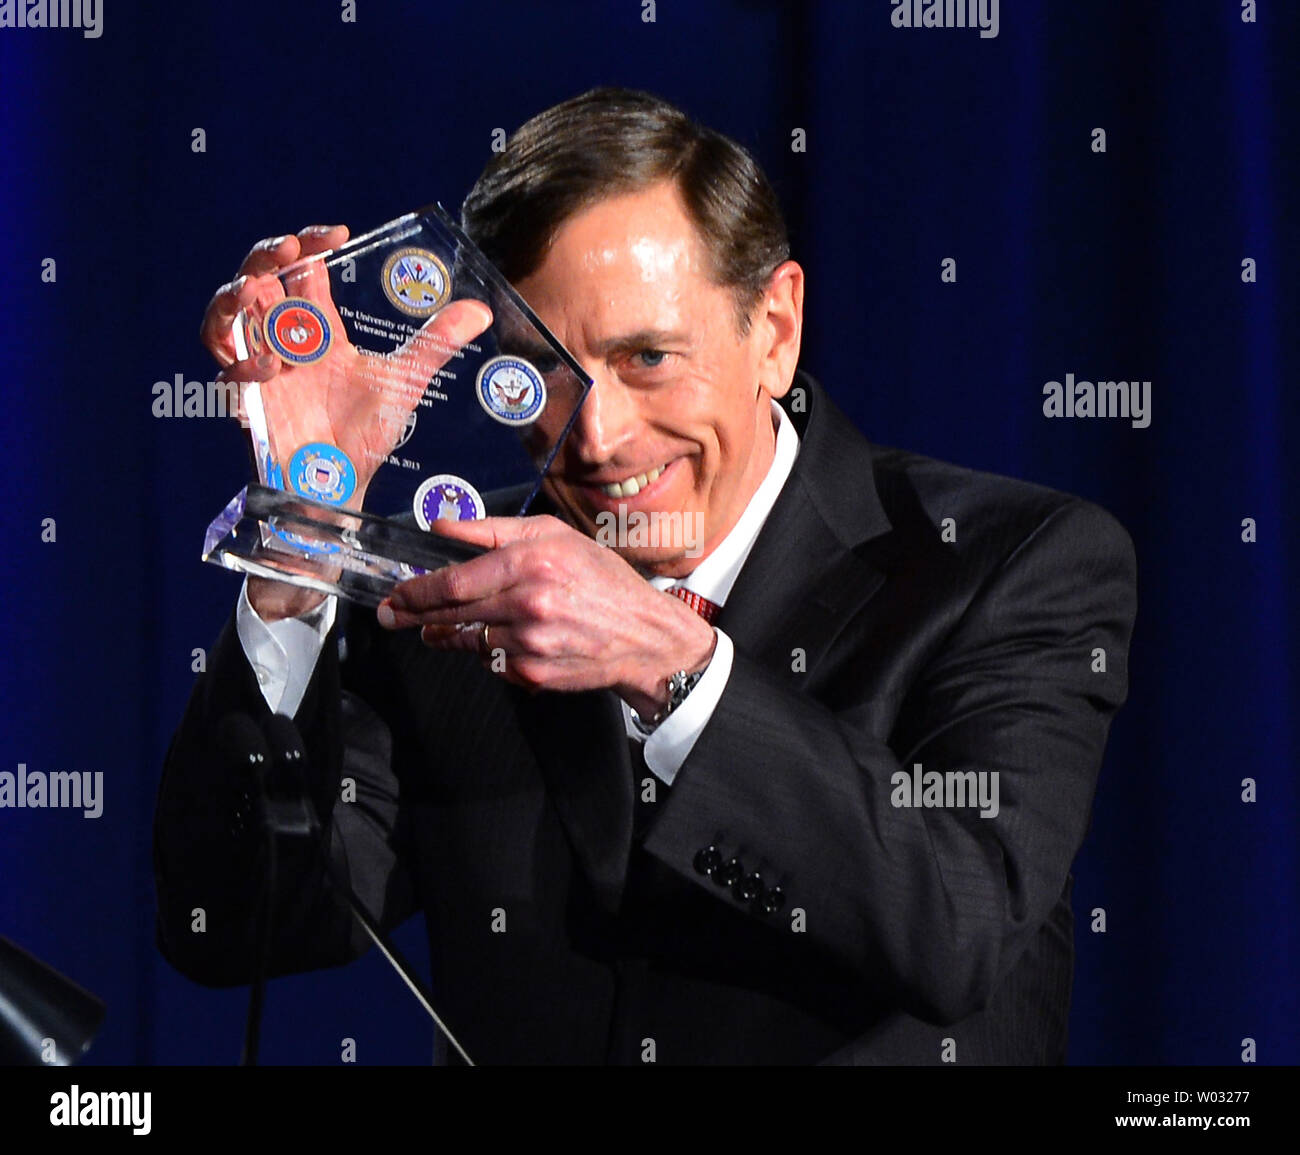 Former CIA director David Petraeus displays a token of appreciation presented to him following Petraeus' address at a University of Southern California event honoring the military  in Los Angeles, California on March 26, 2013. In the first public appearance since stepping down last November as head of the CIA after admitting to an affair, Petraeus said he regretted and apologized for the circumstances that led to his resignation.   UPI/Jim Ruymen Stock Photo